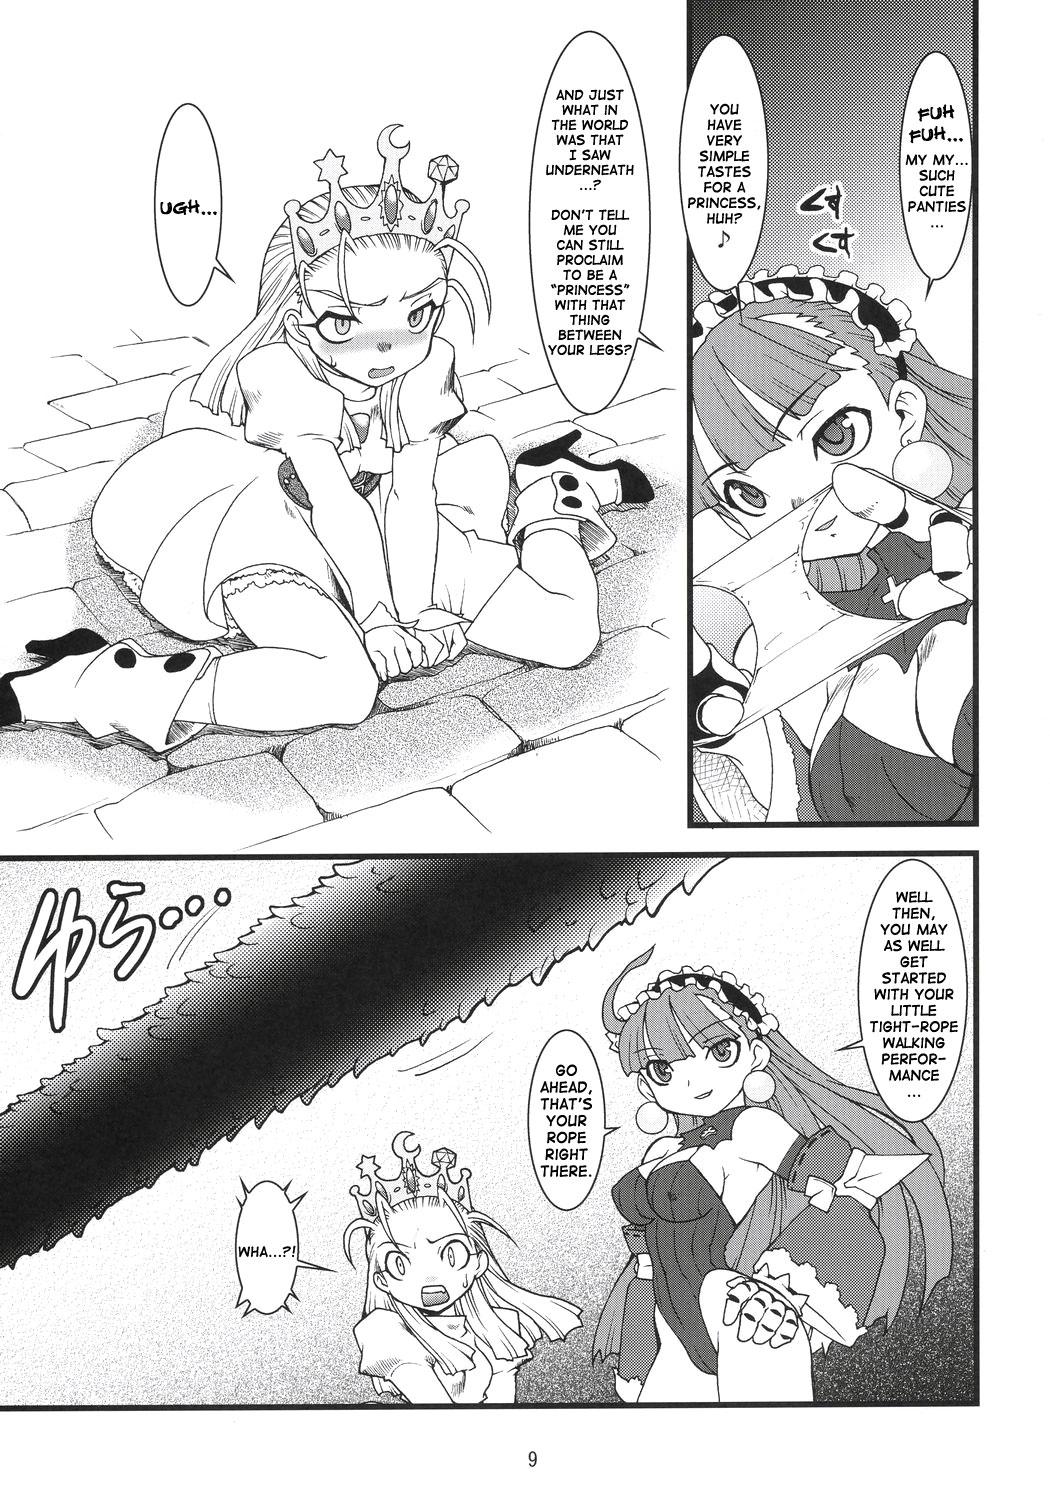 Pussy Licking Royal Standard 2 - Cyberbots La pucelle Male - Page 8